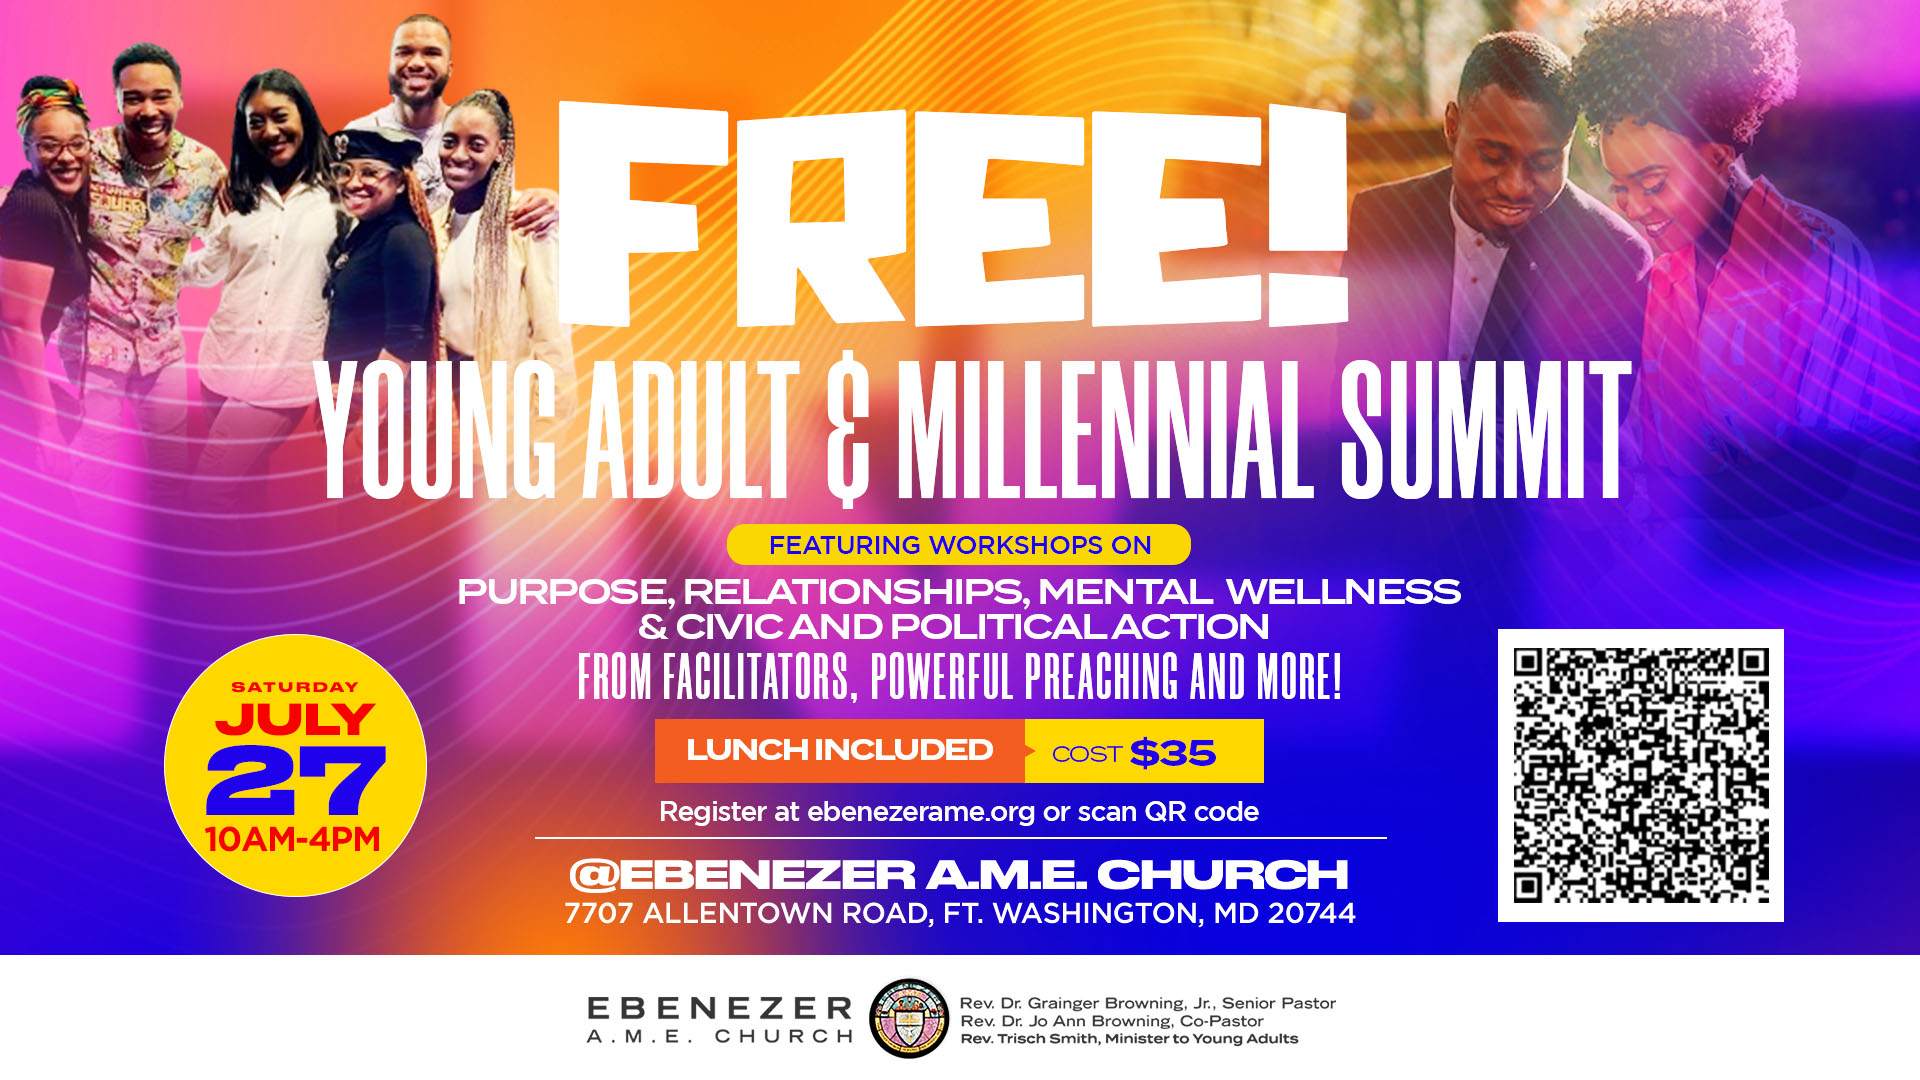 Young Adult & Millennial Summit